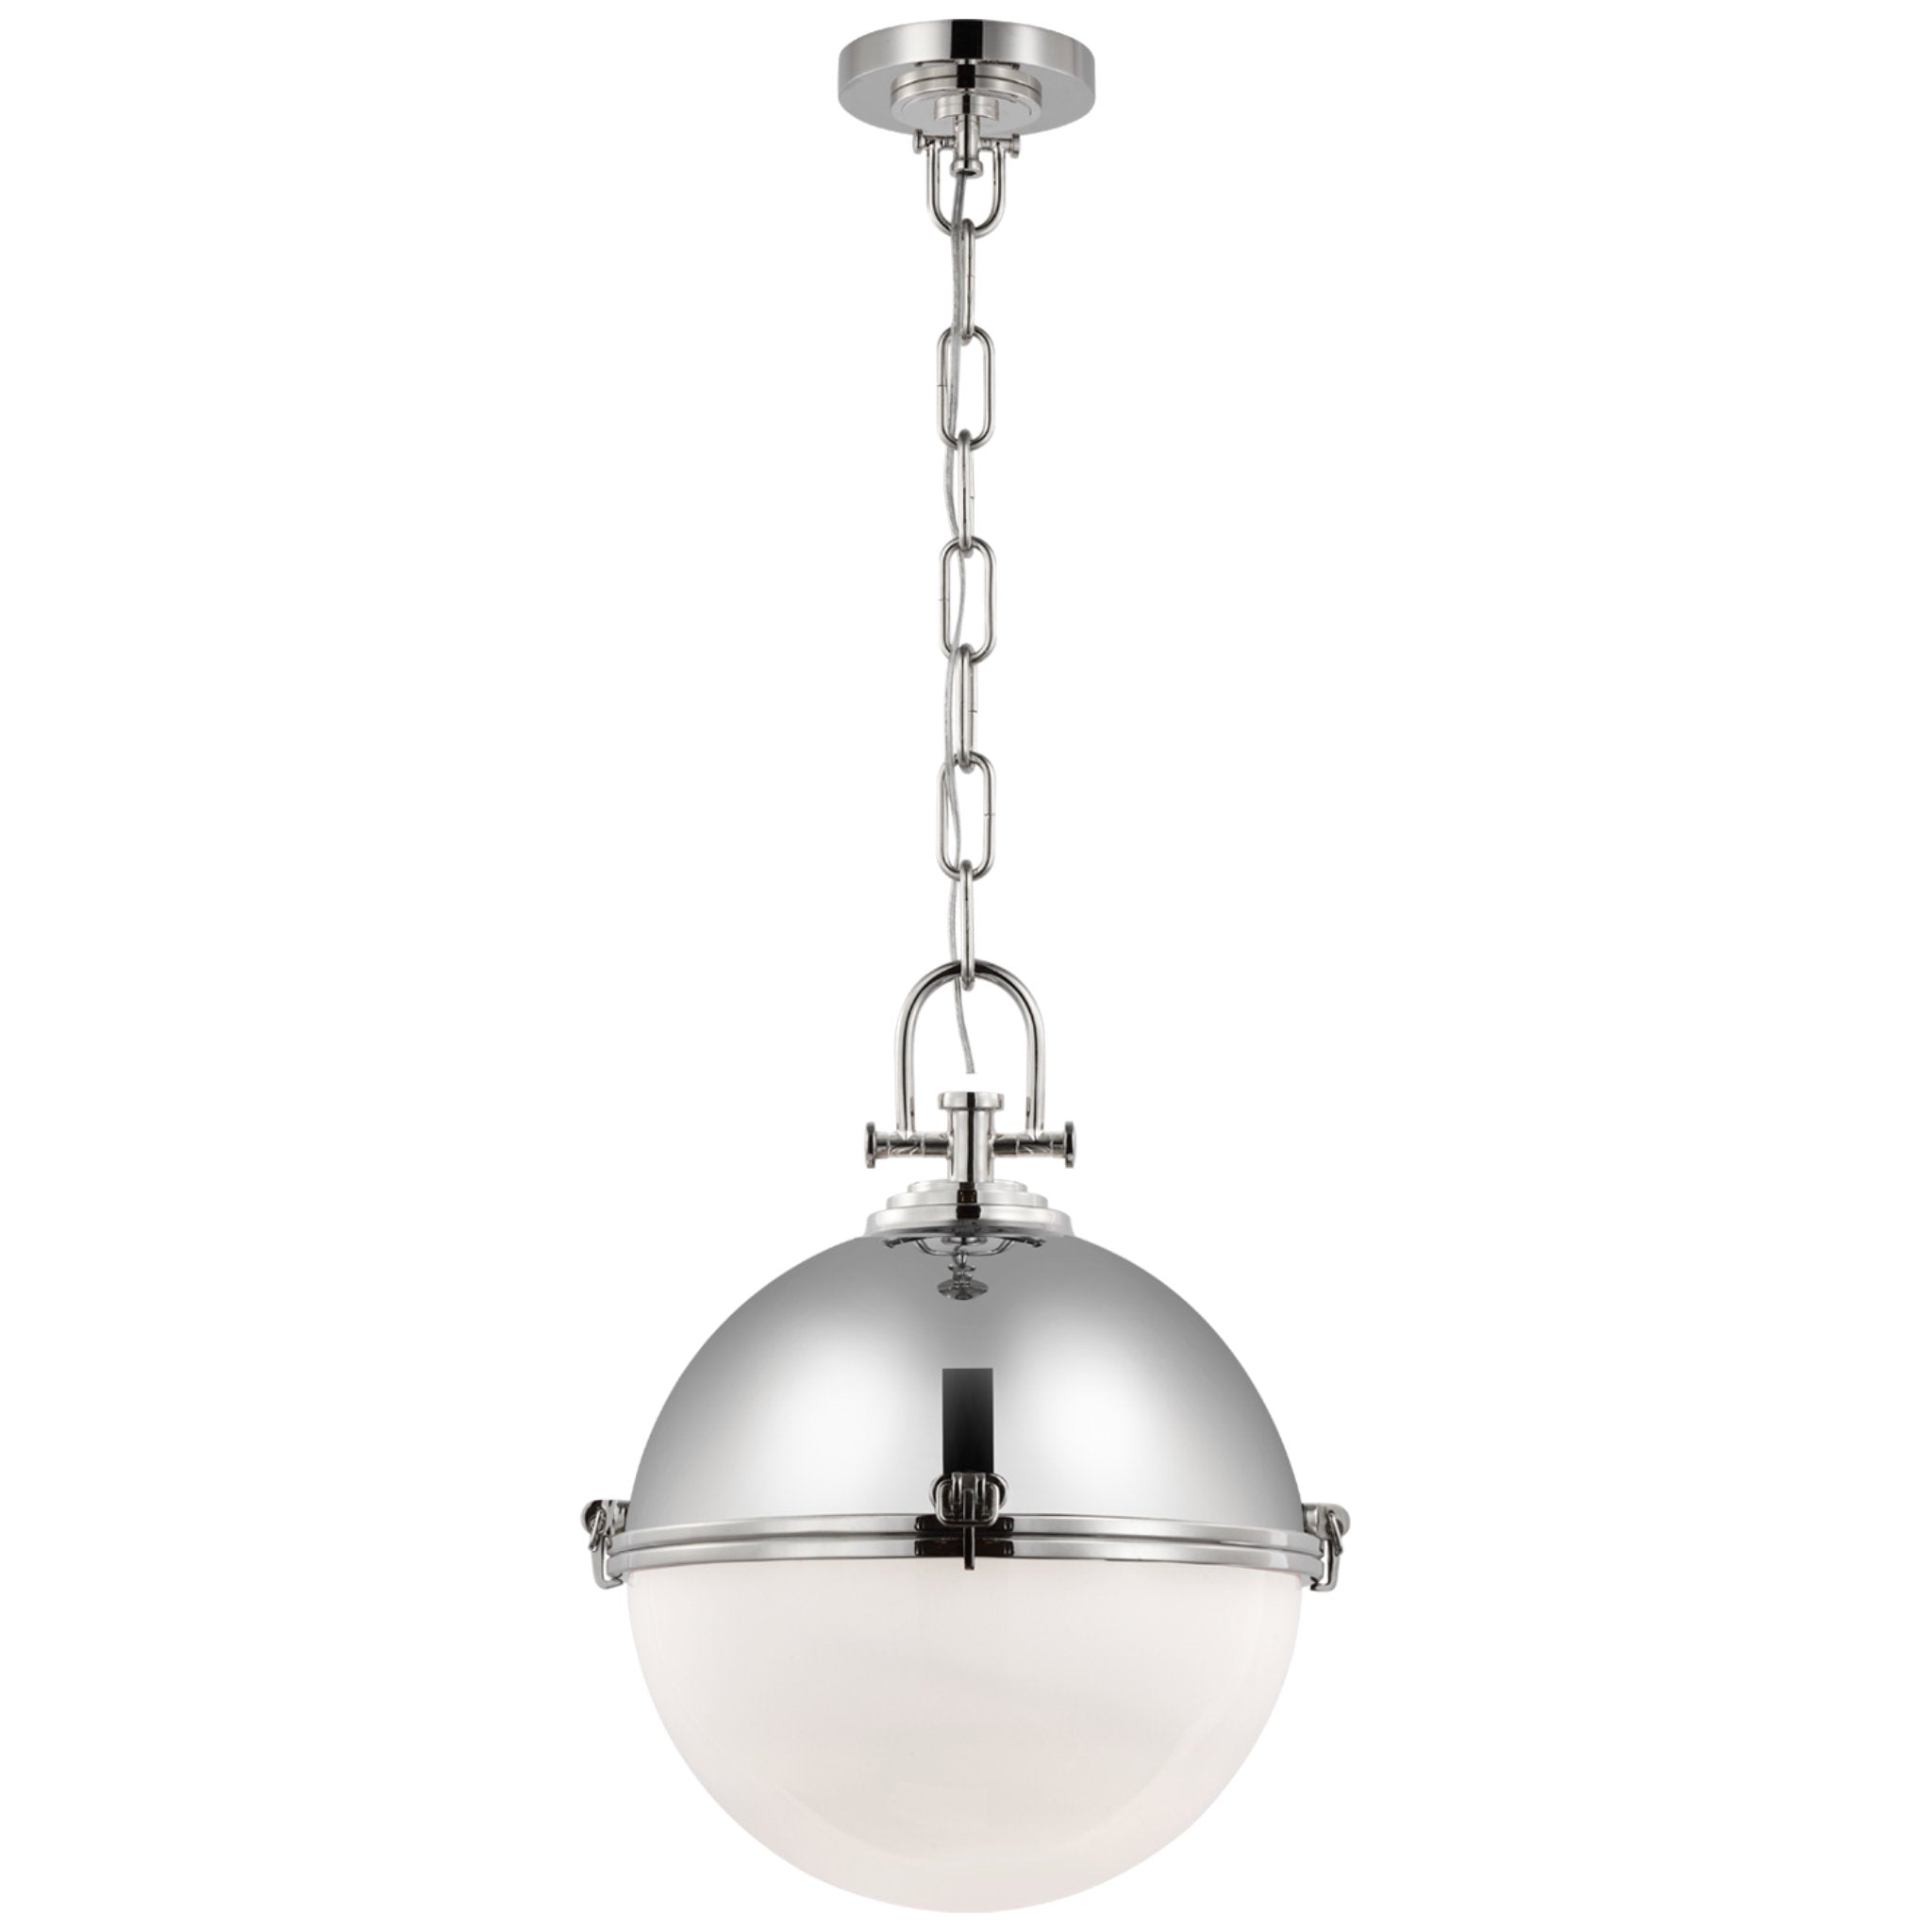 Chapman & Myers Adrian X-Large Globe Pendant in Polished Nickel with White Glass